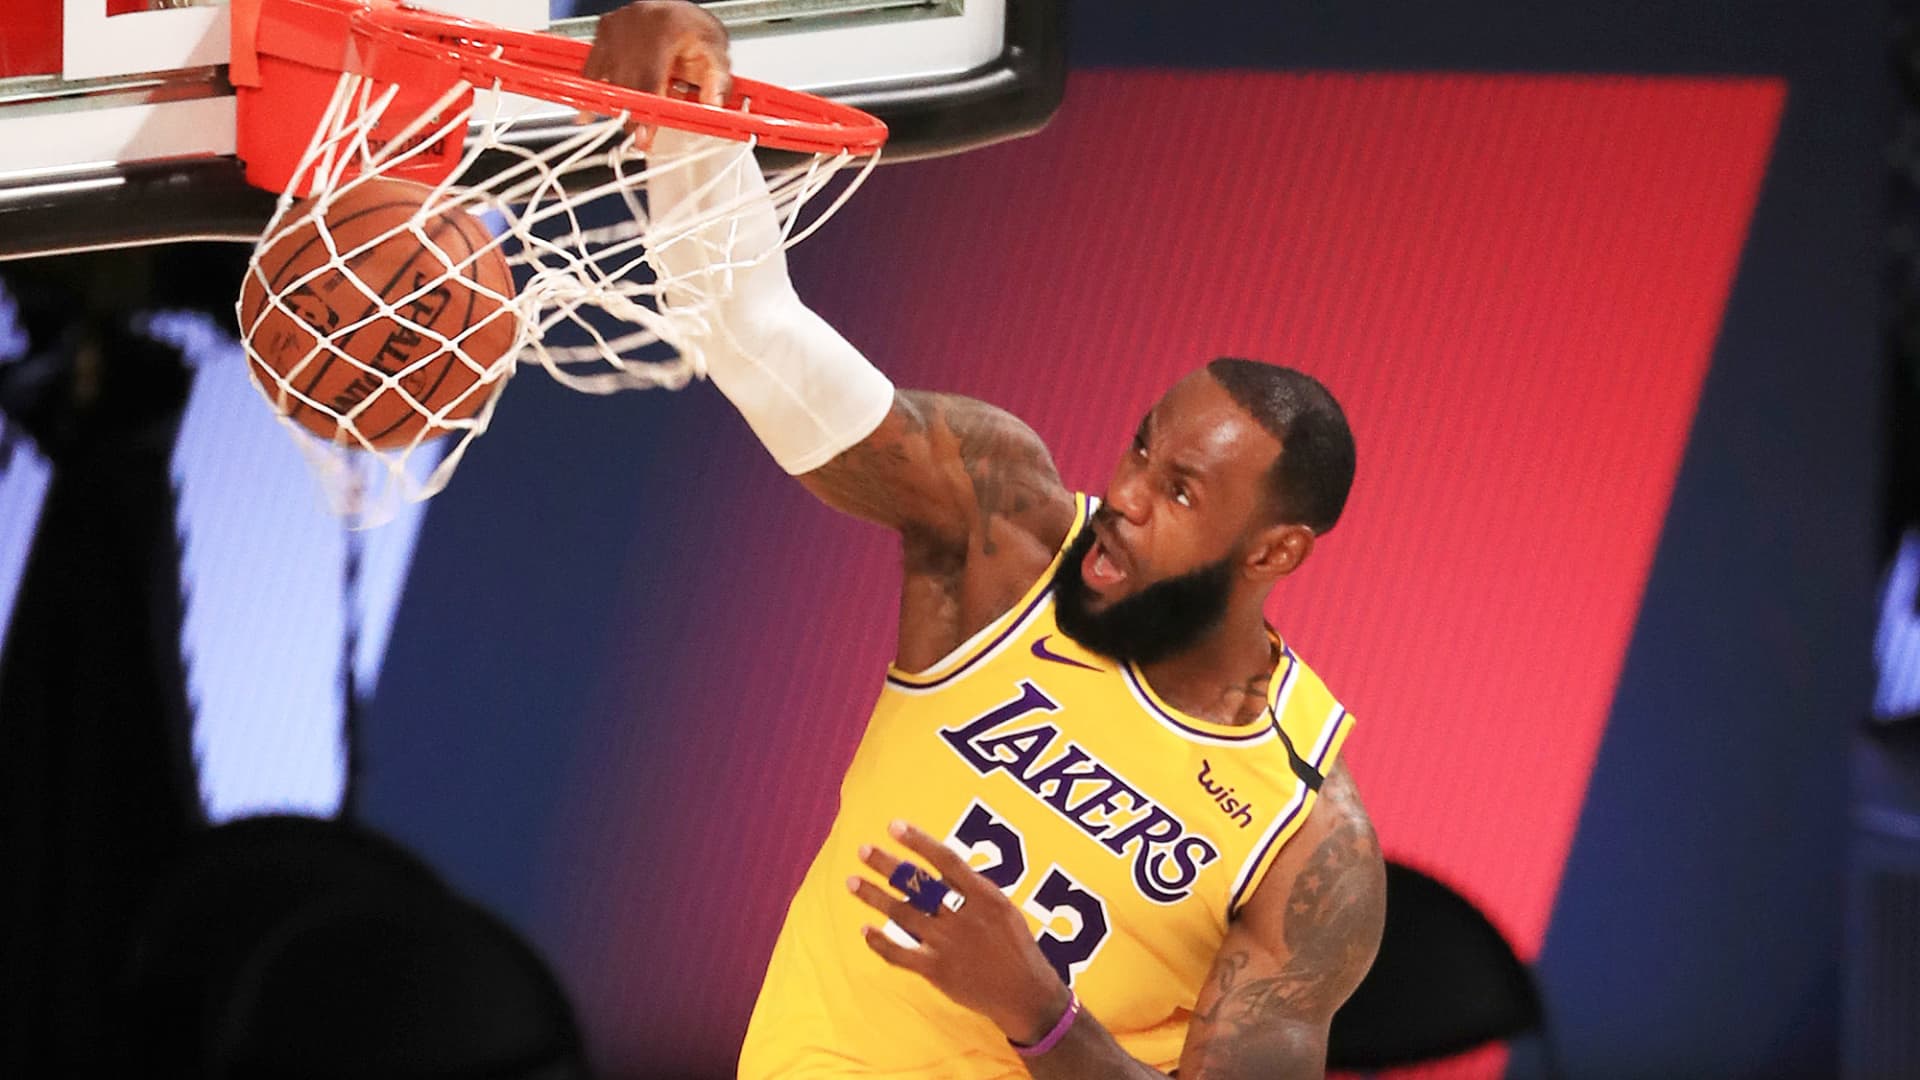 LeBron James of the Los Angeles Lakers at a game against the LA Clippers at ESPN Wide World Of Sports Complex on July 30, 2020 in Lake Buena Vista, Florida.